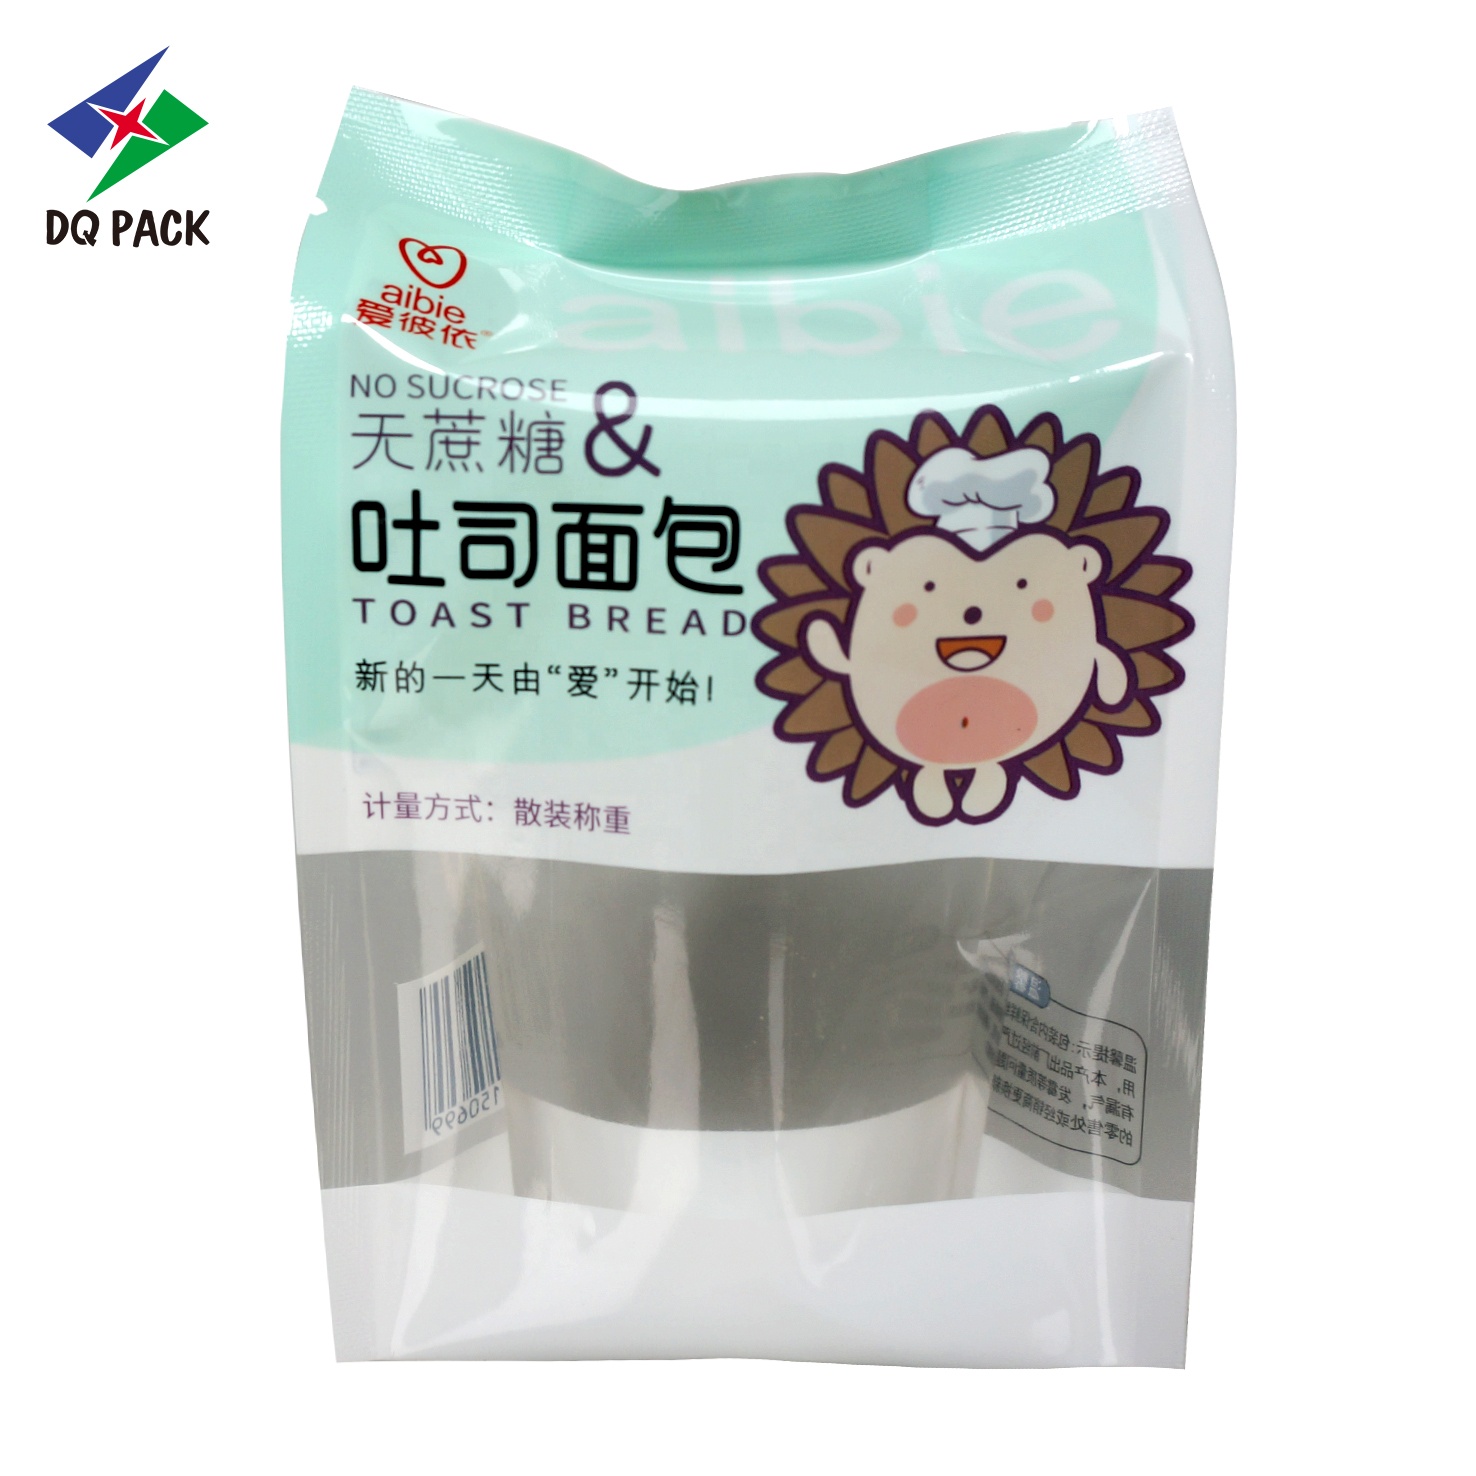 DQ PACK Food Grade Bread Bag 4 Sides Seal Bag with Transparent packaging